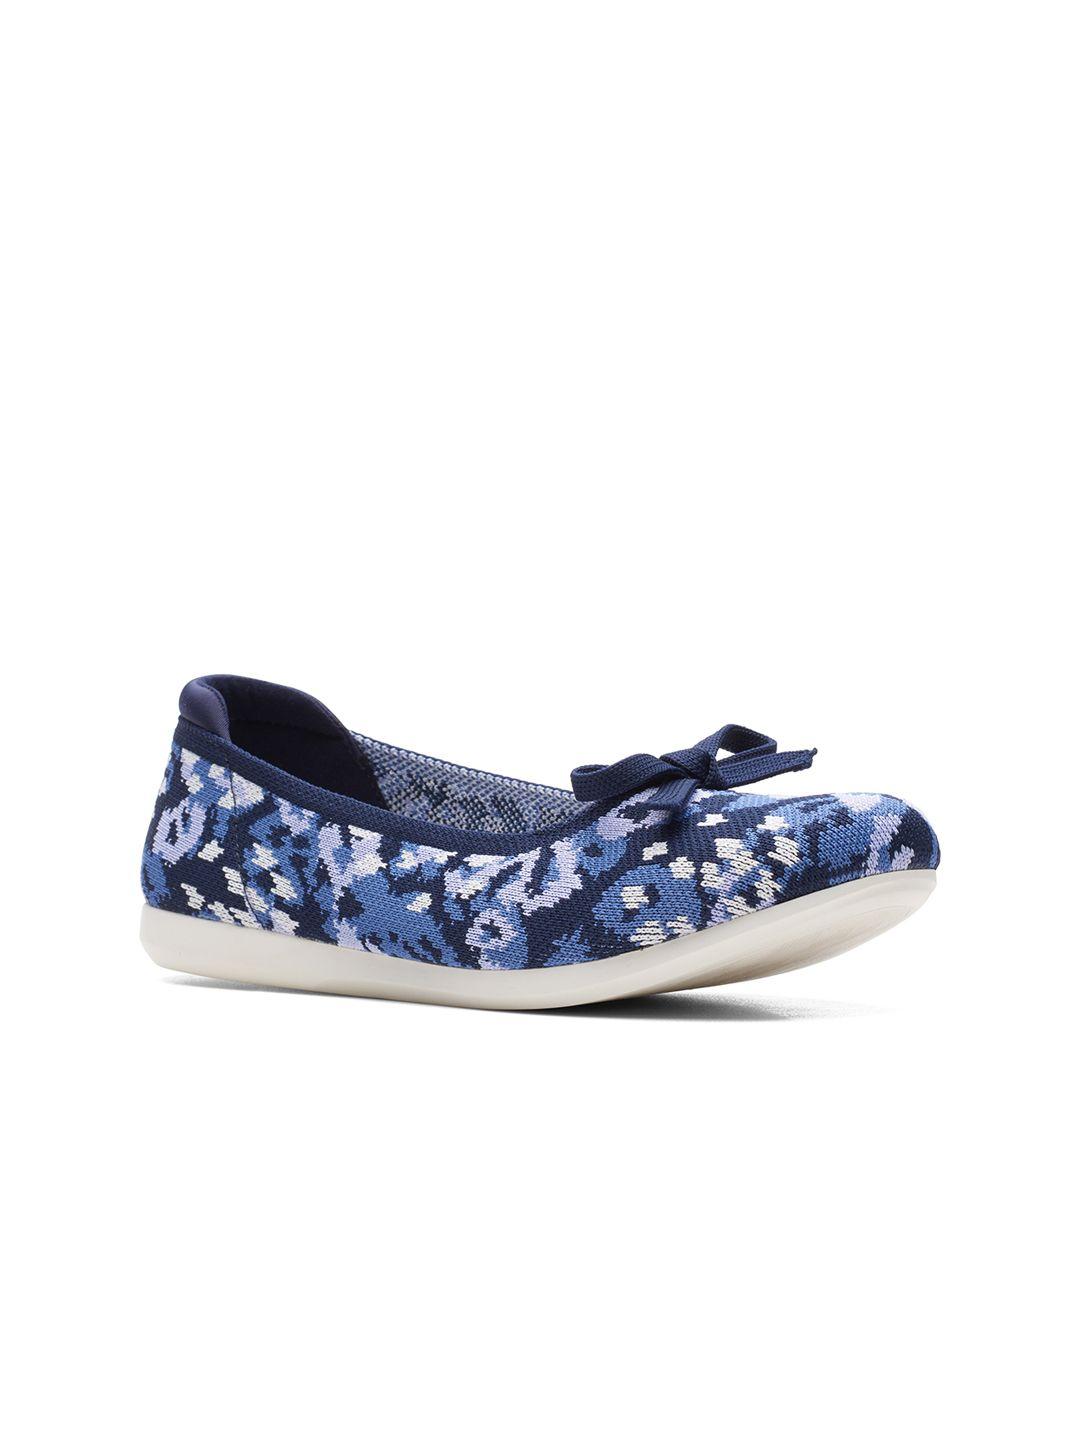 clarks women printed ballerinas with bows